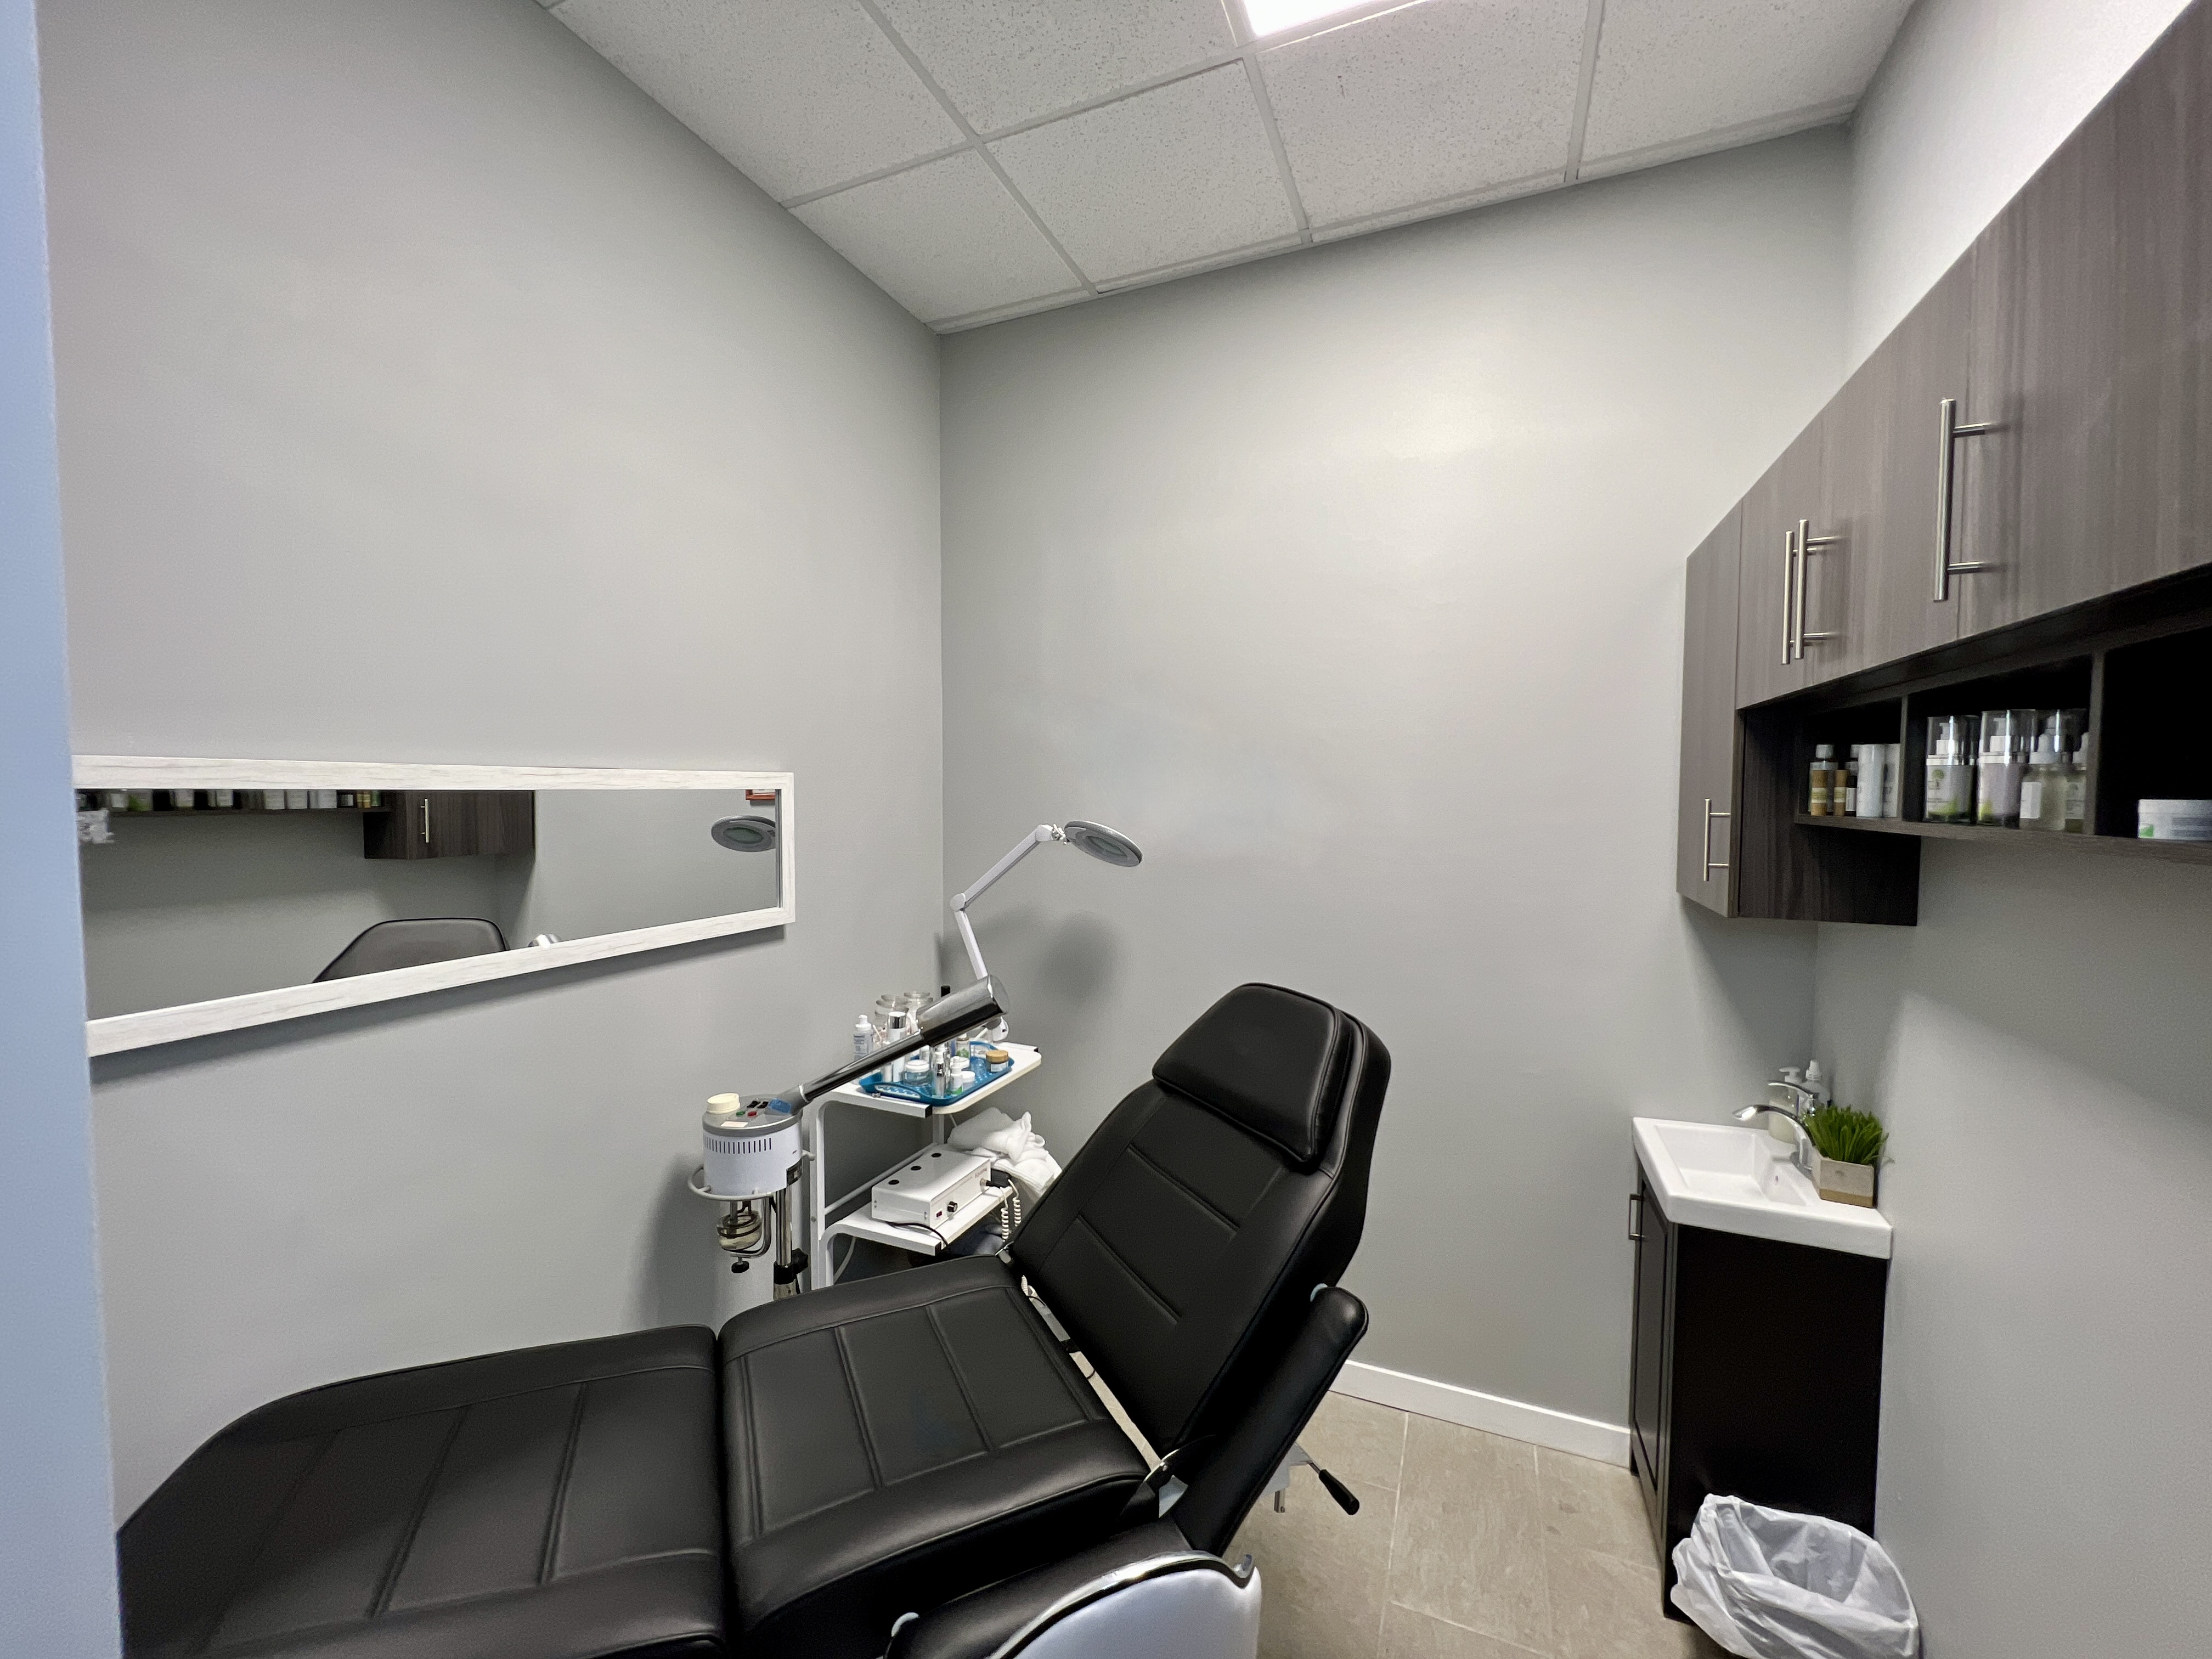 Beauty Salon For Sale in Ottawa listed with My Ottawa Agent